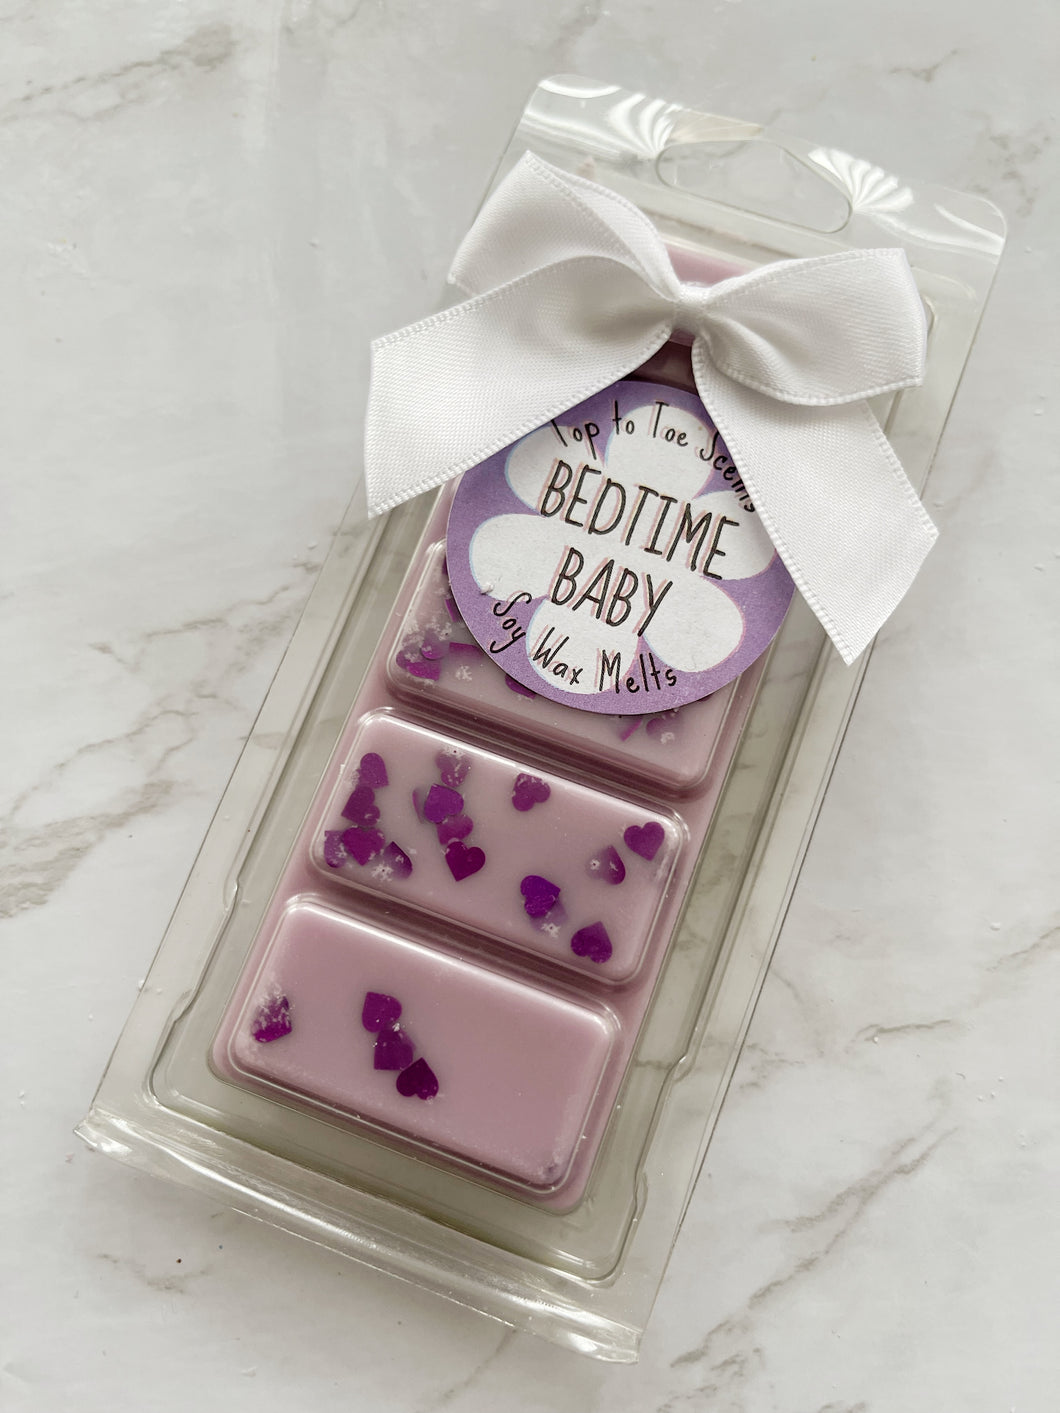 Bedtime Baby Soy Wax Melts